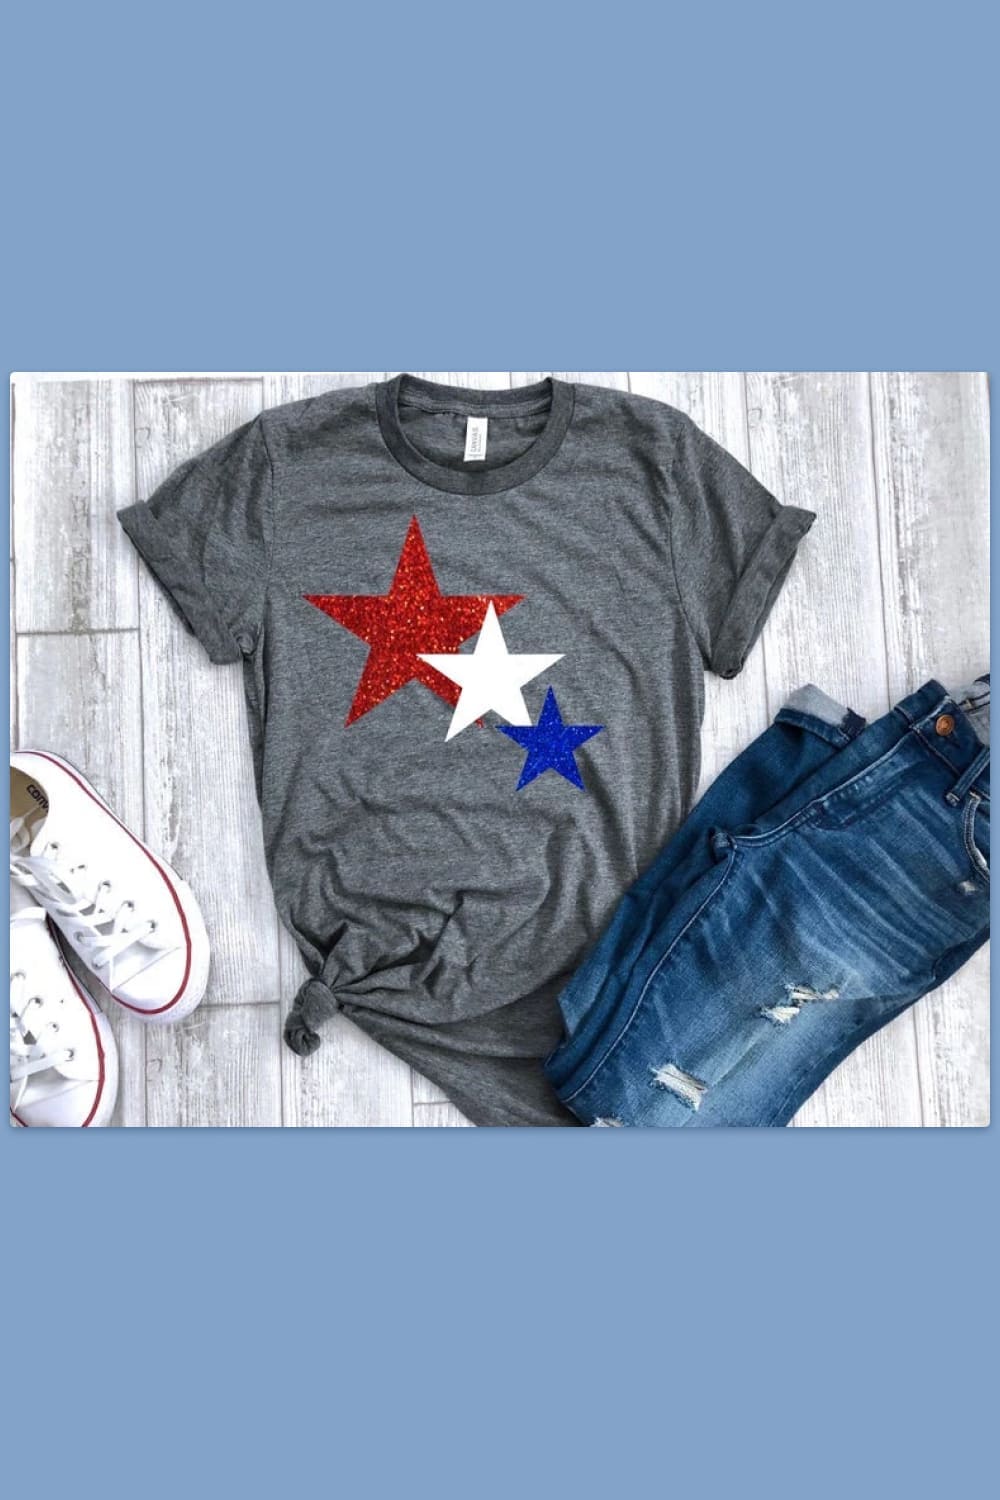 T-shirt with red, white and blue stars.